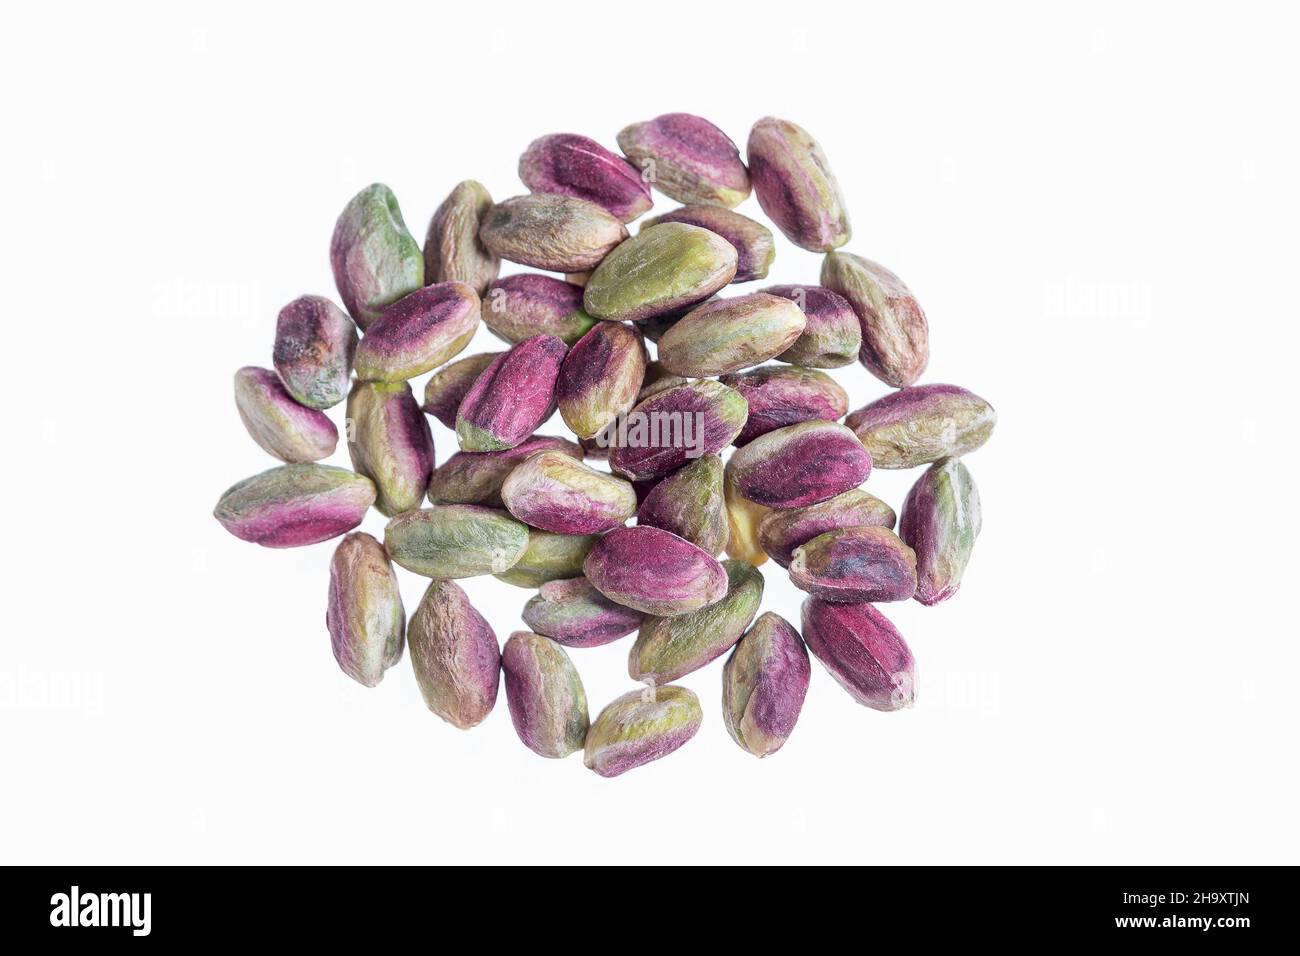 Pistachio kernels (seen from above) Stock Photo